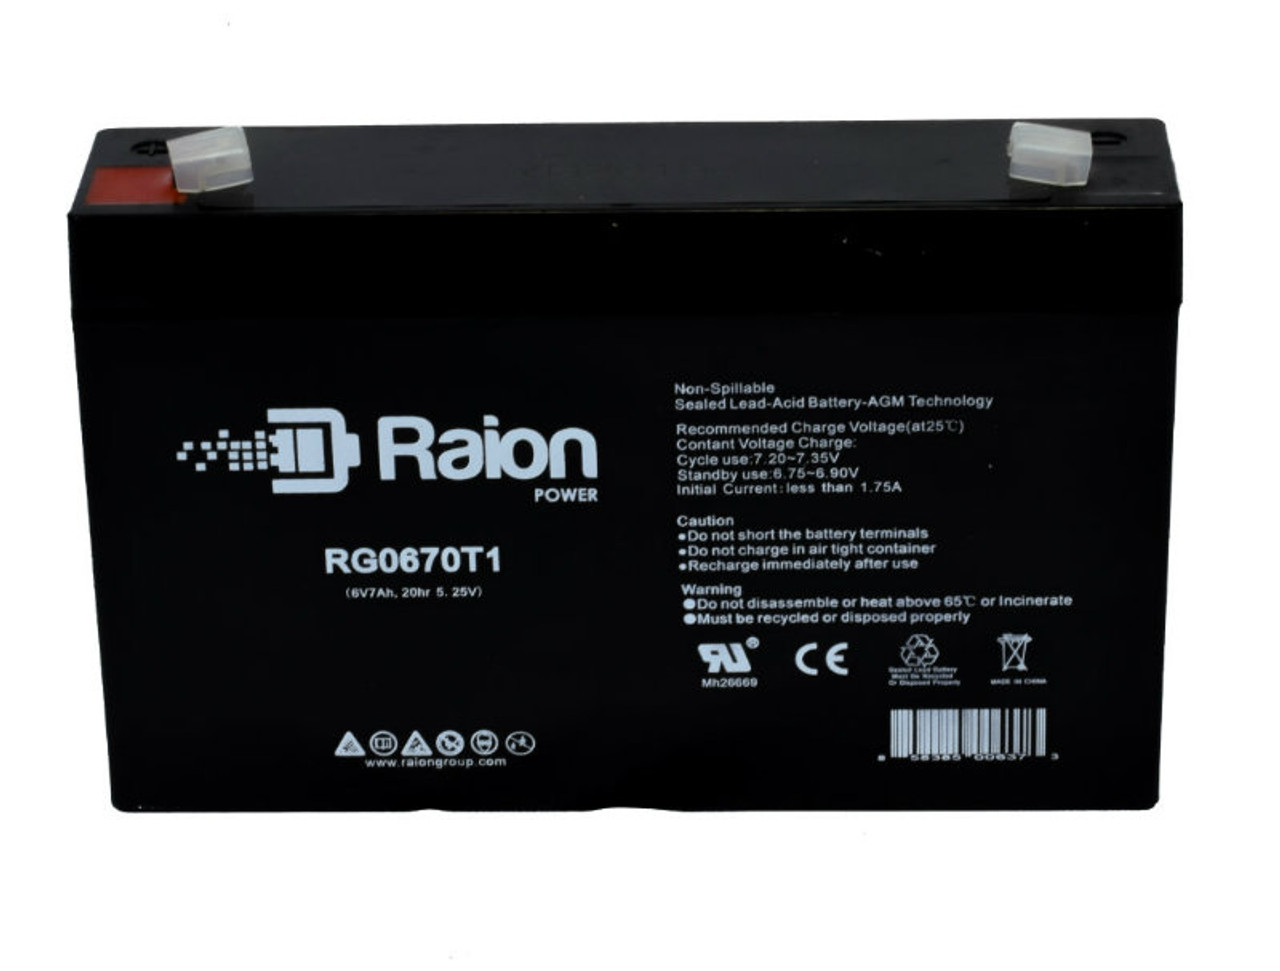 Raion Power RG0670T1 Replacement Battery Cartridge for Gould SP2120 DISPLAY MONITOR